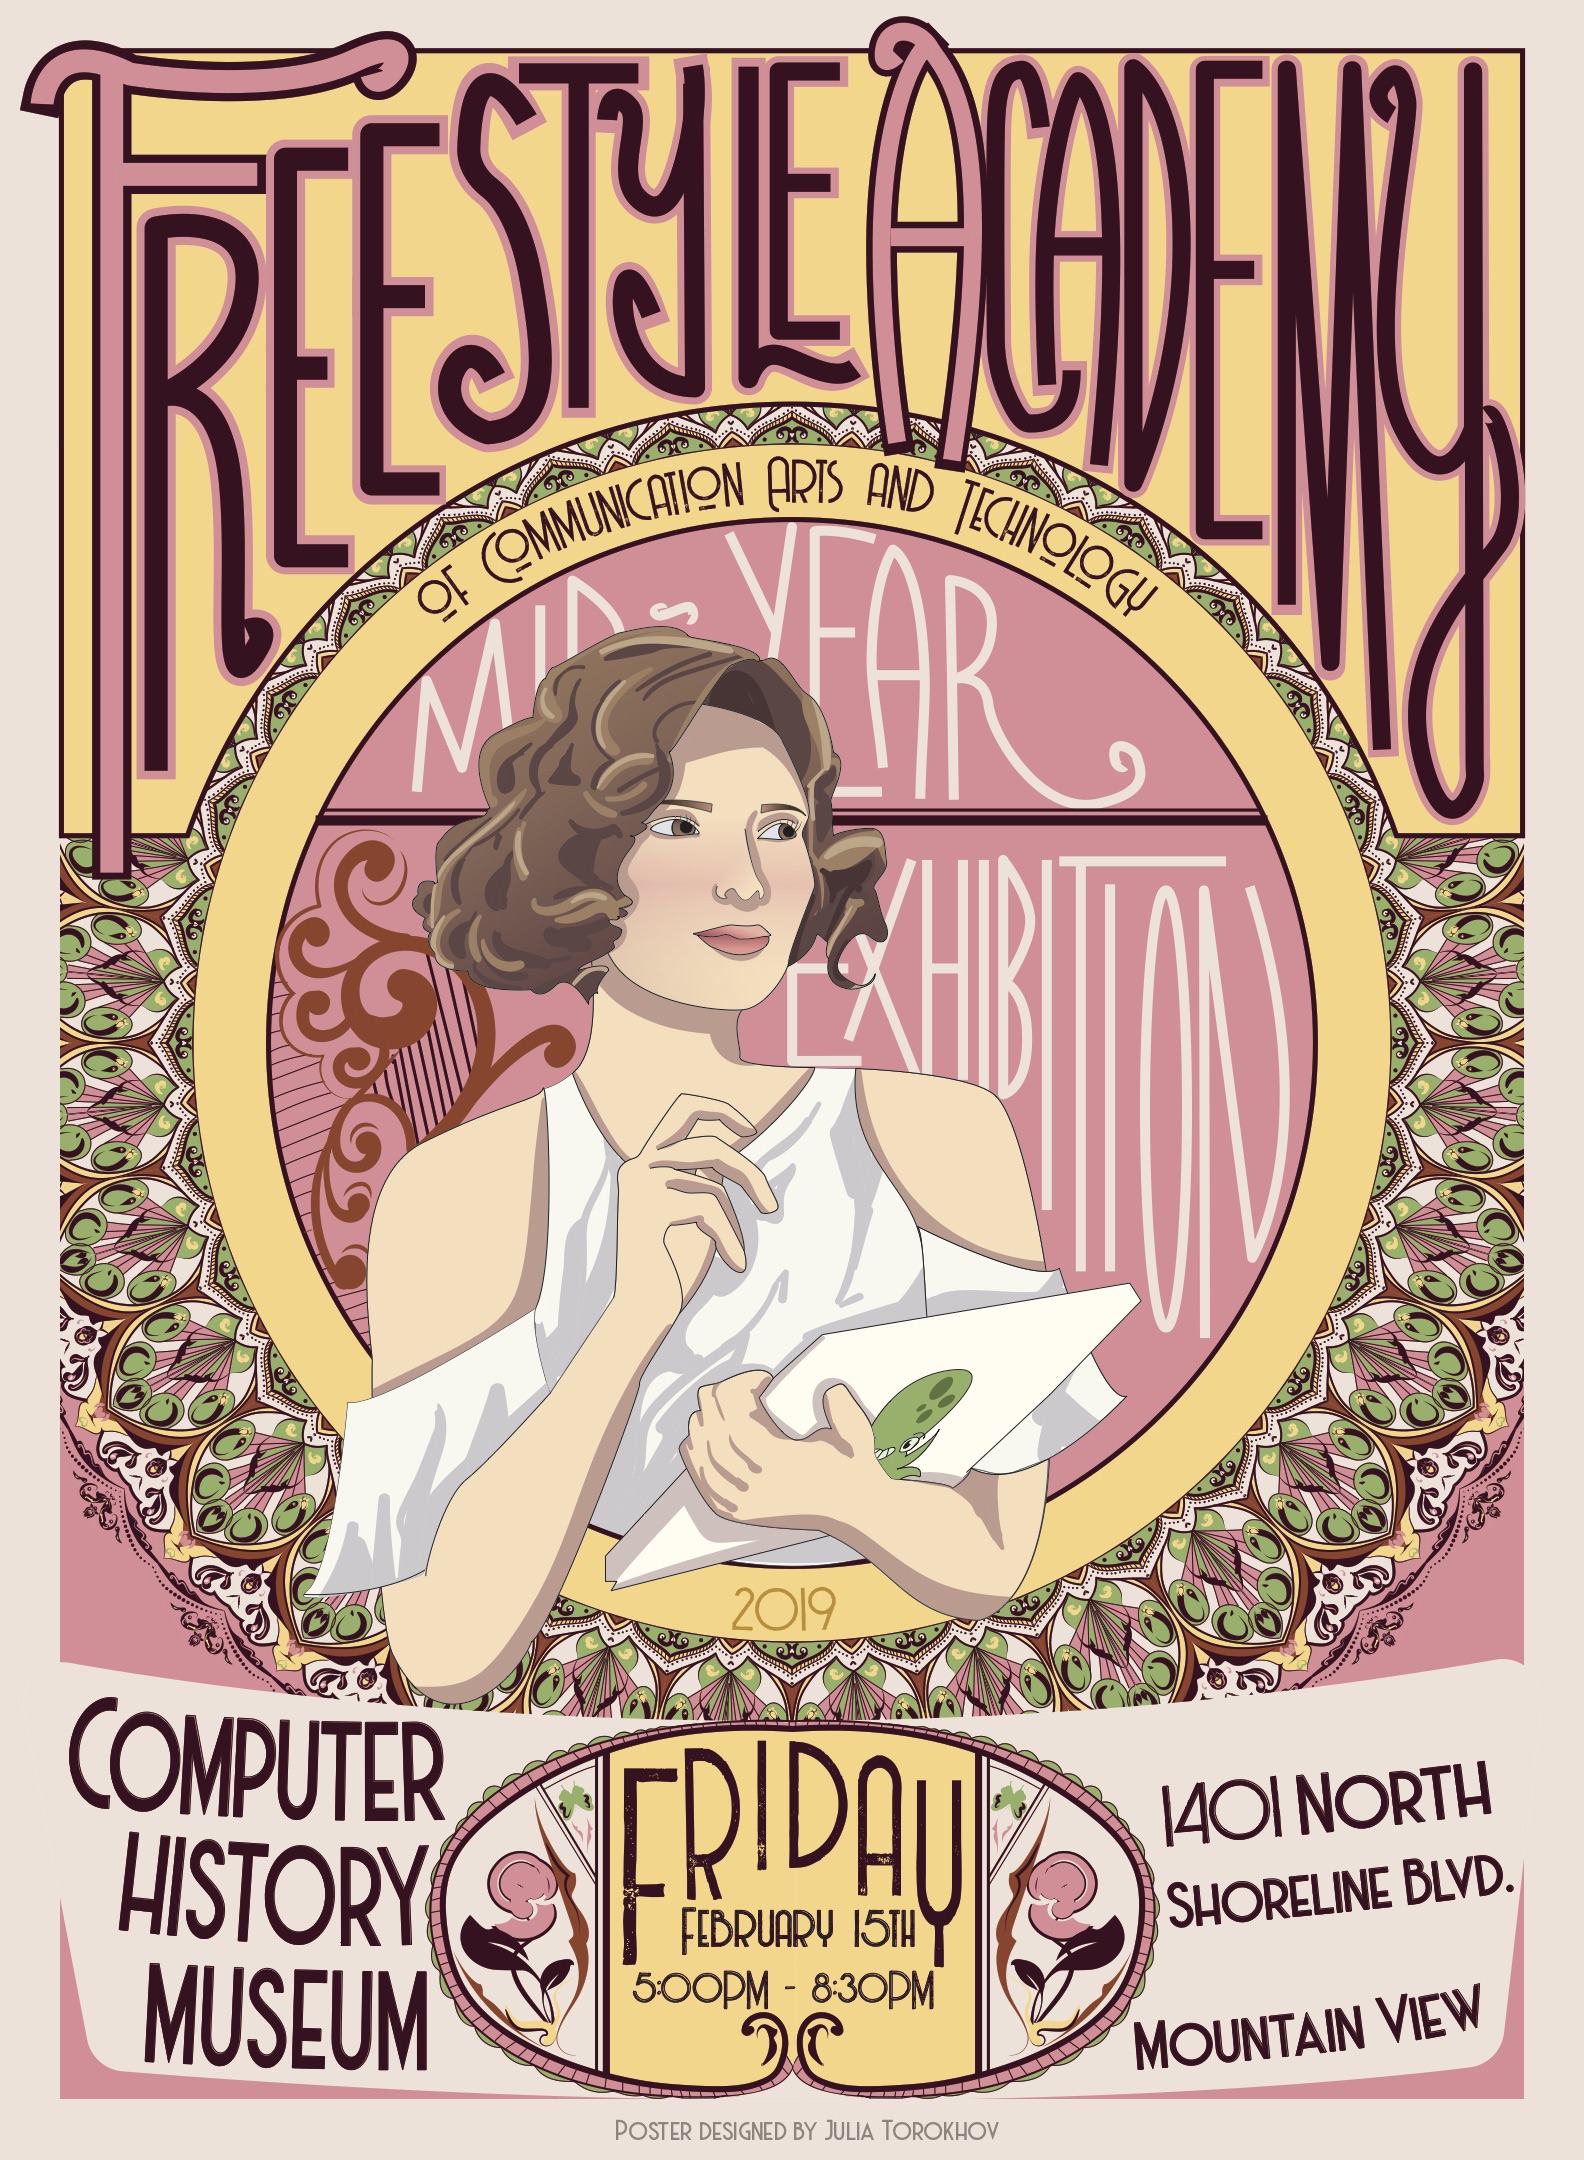 A poster with a lady on it advertising Freestyle Exhibition 2019